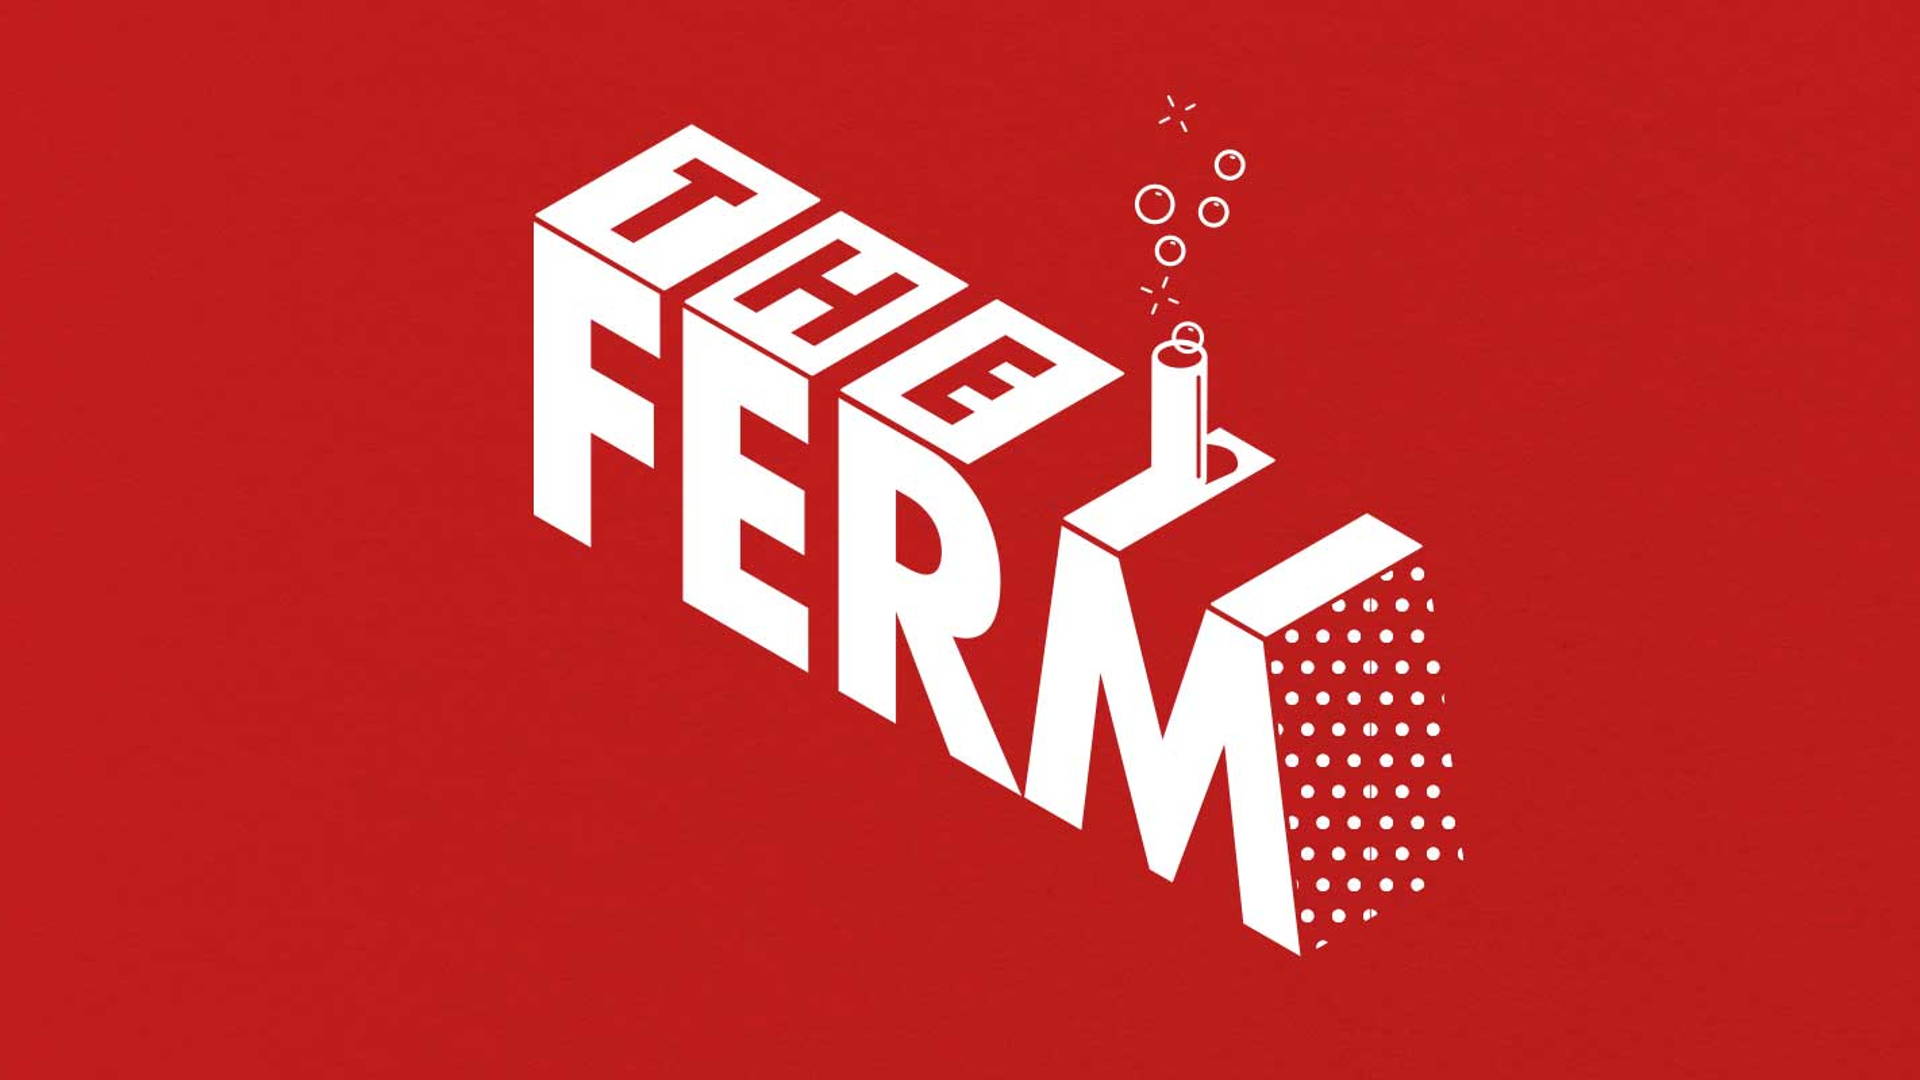 Featured image for Agency Percept Creates A Playful Brand Identity For Fermented Sauce Line ‘The Ferm’